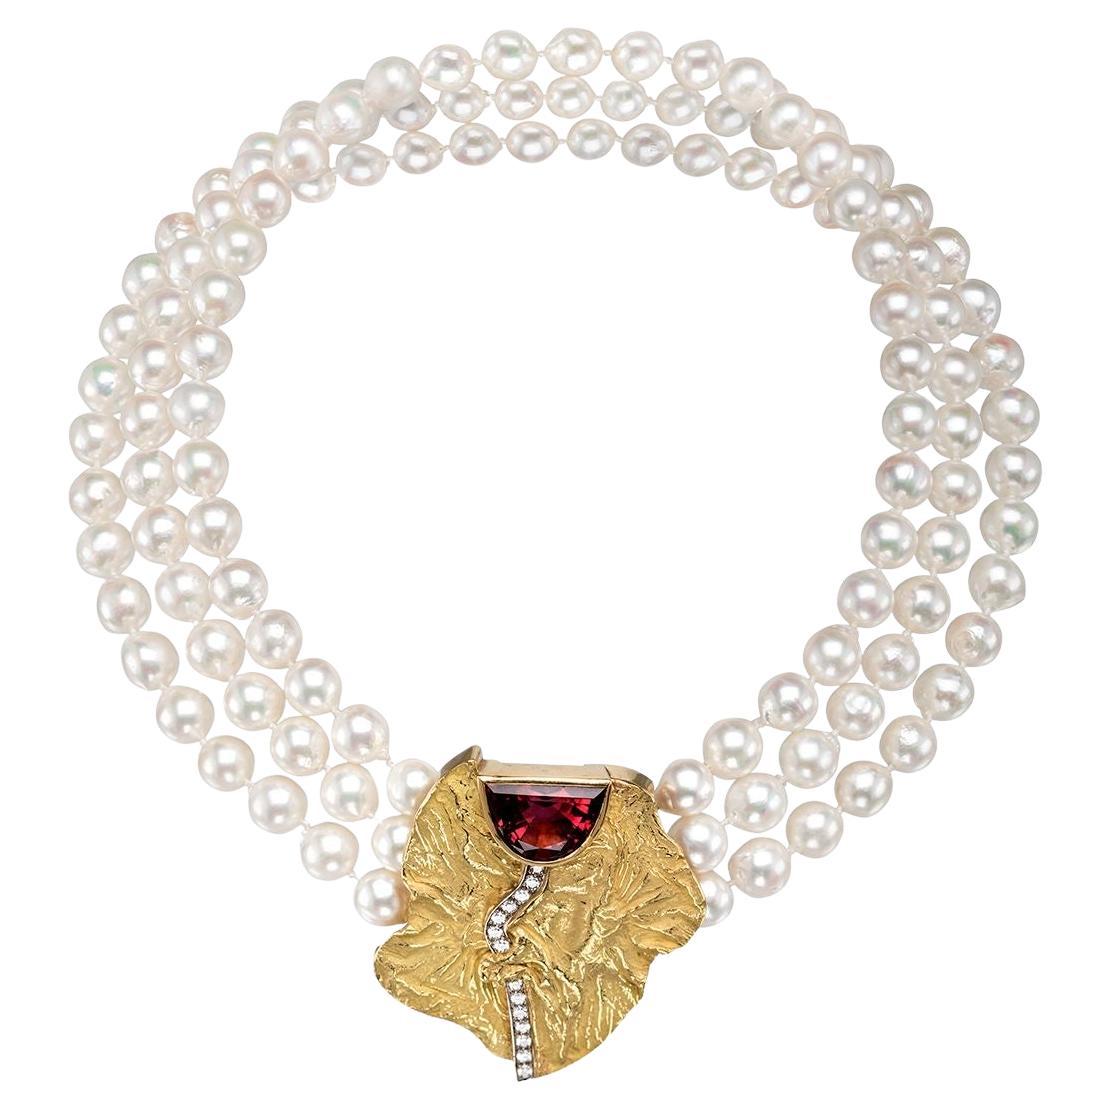 18k Reticulated Gold Necklace with Akoya Pearls, Pink Tourmaline, and Diamonds